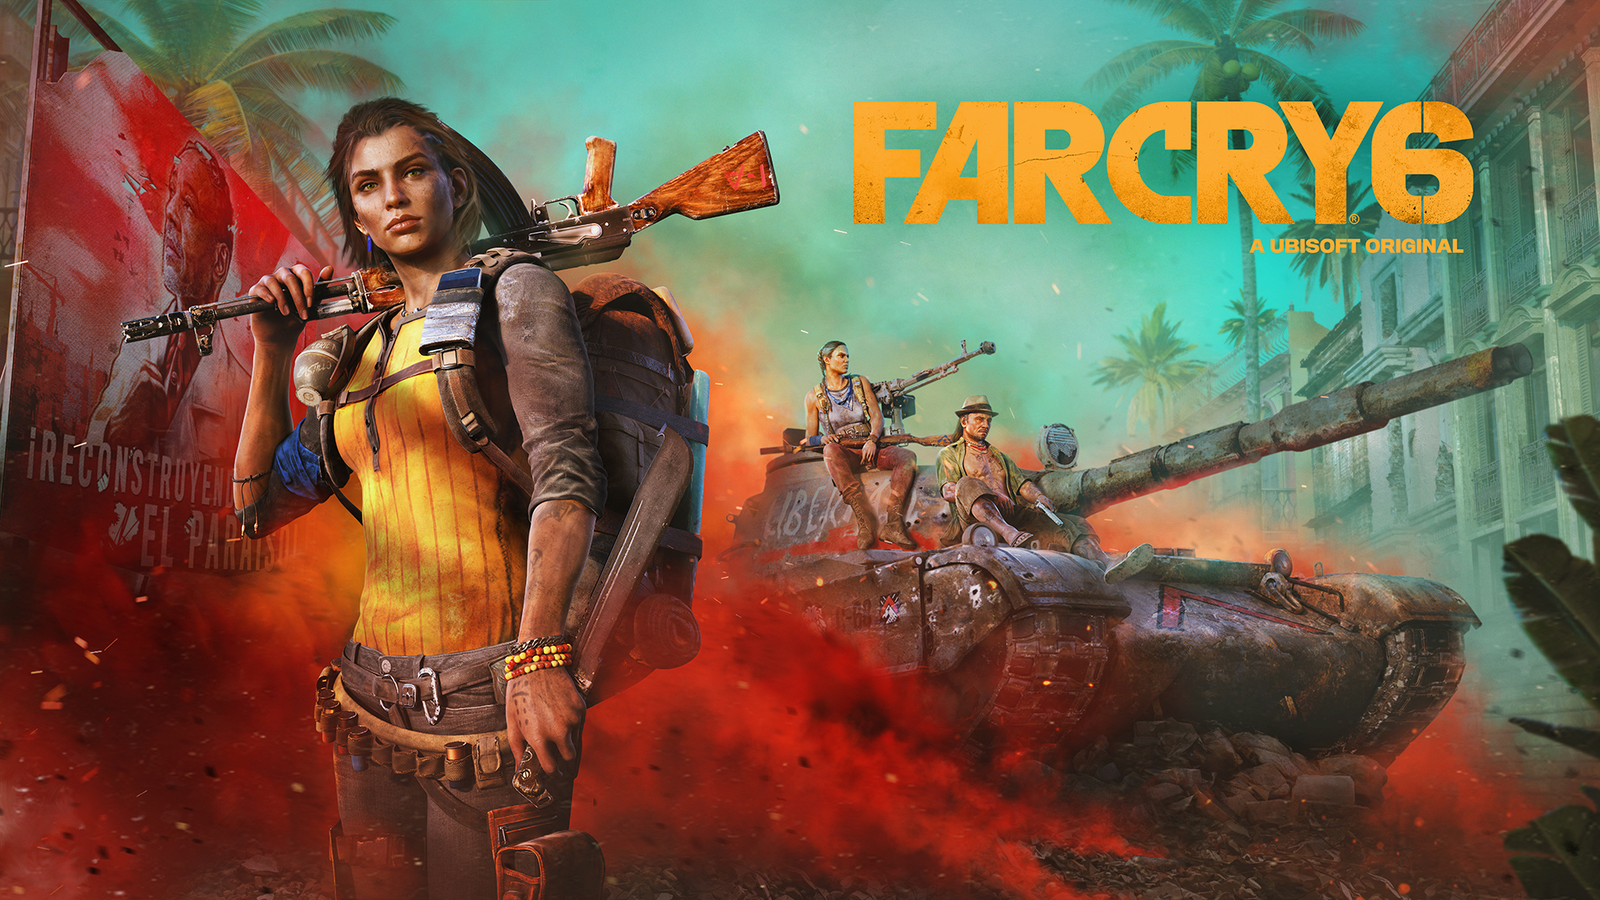 Steam users can play Far Cry 6 free right now